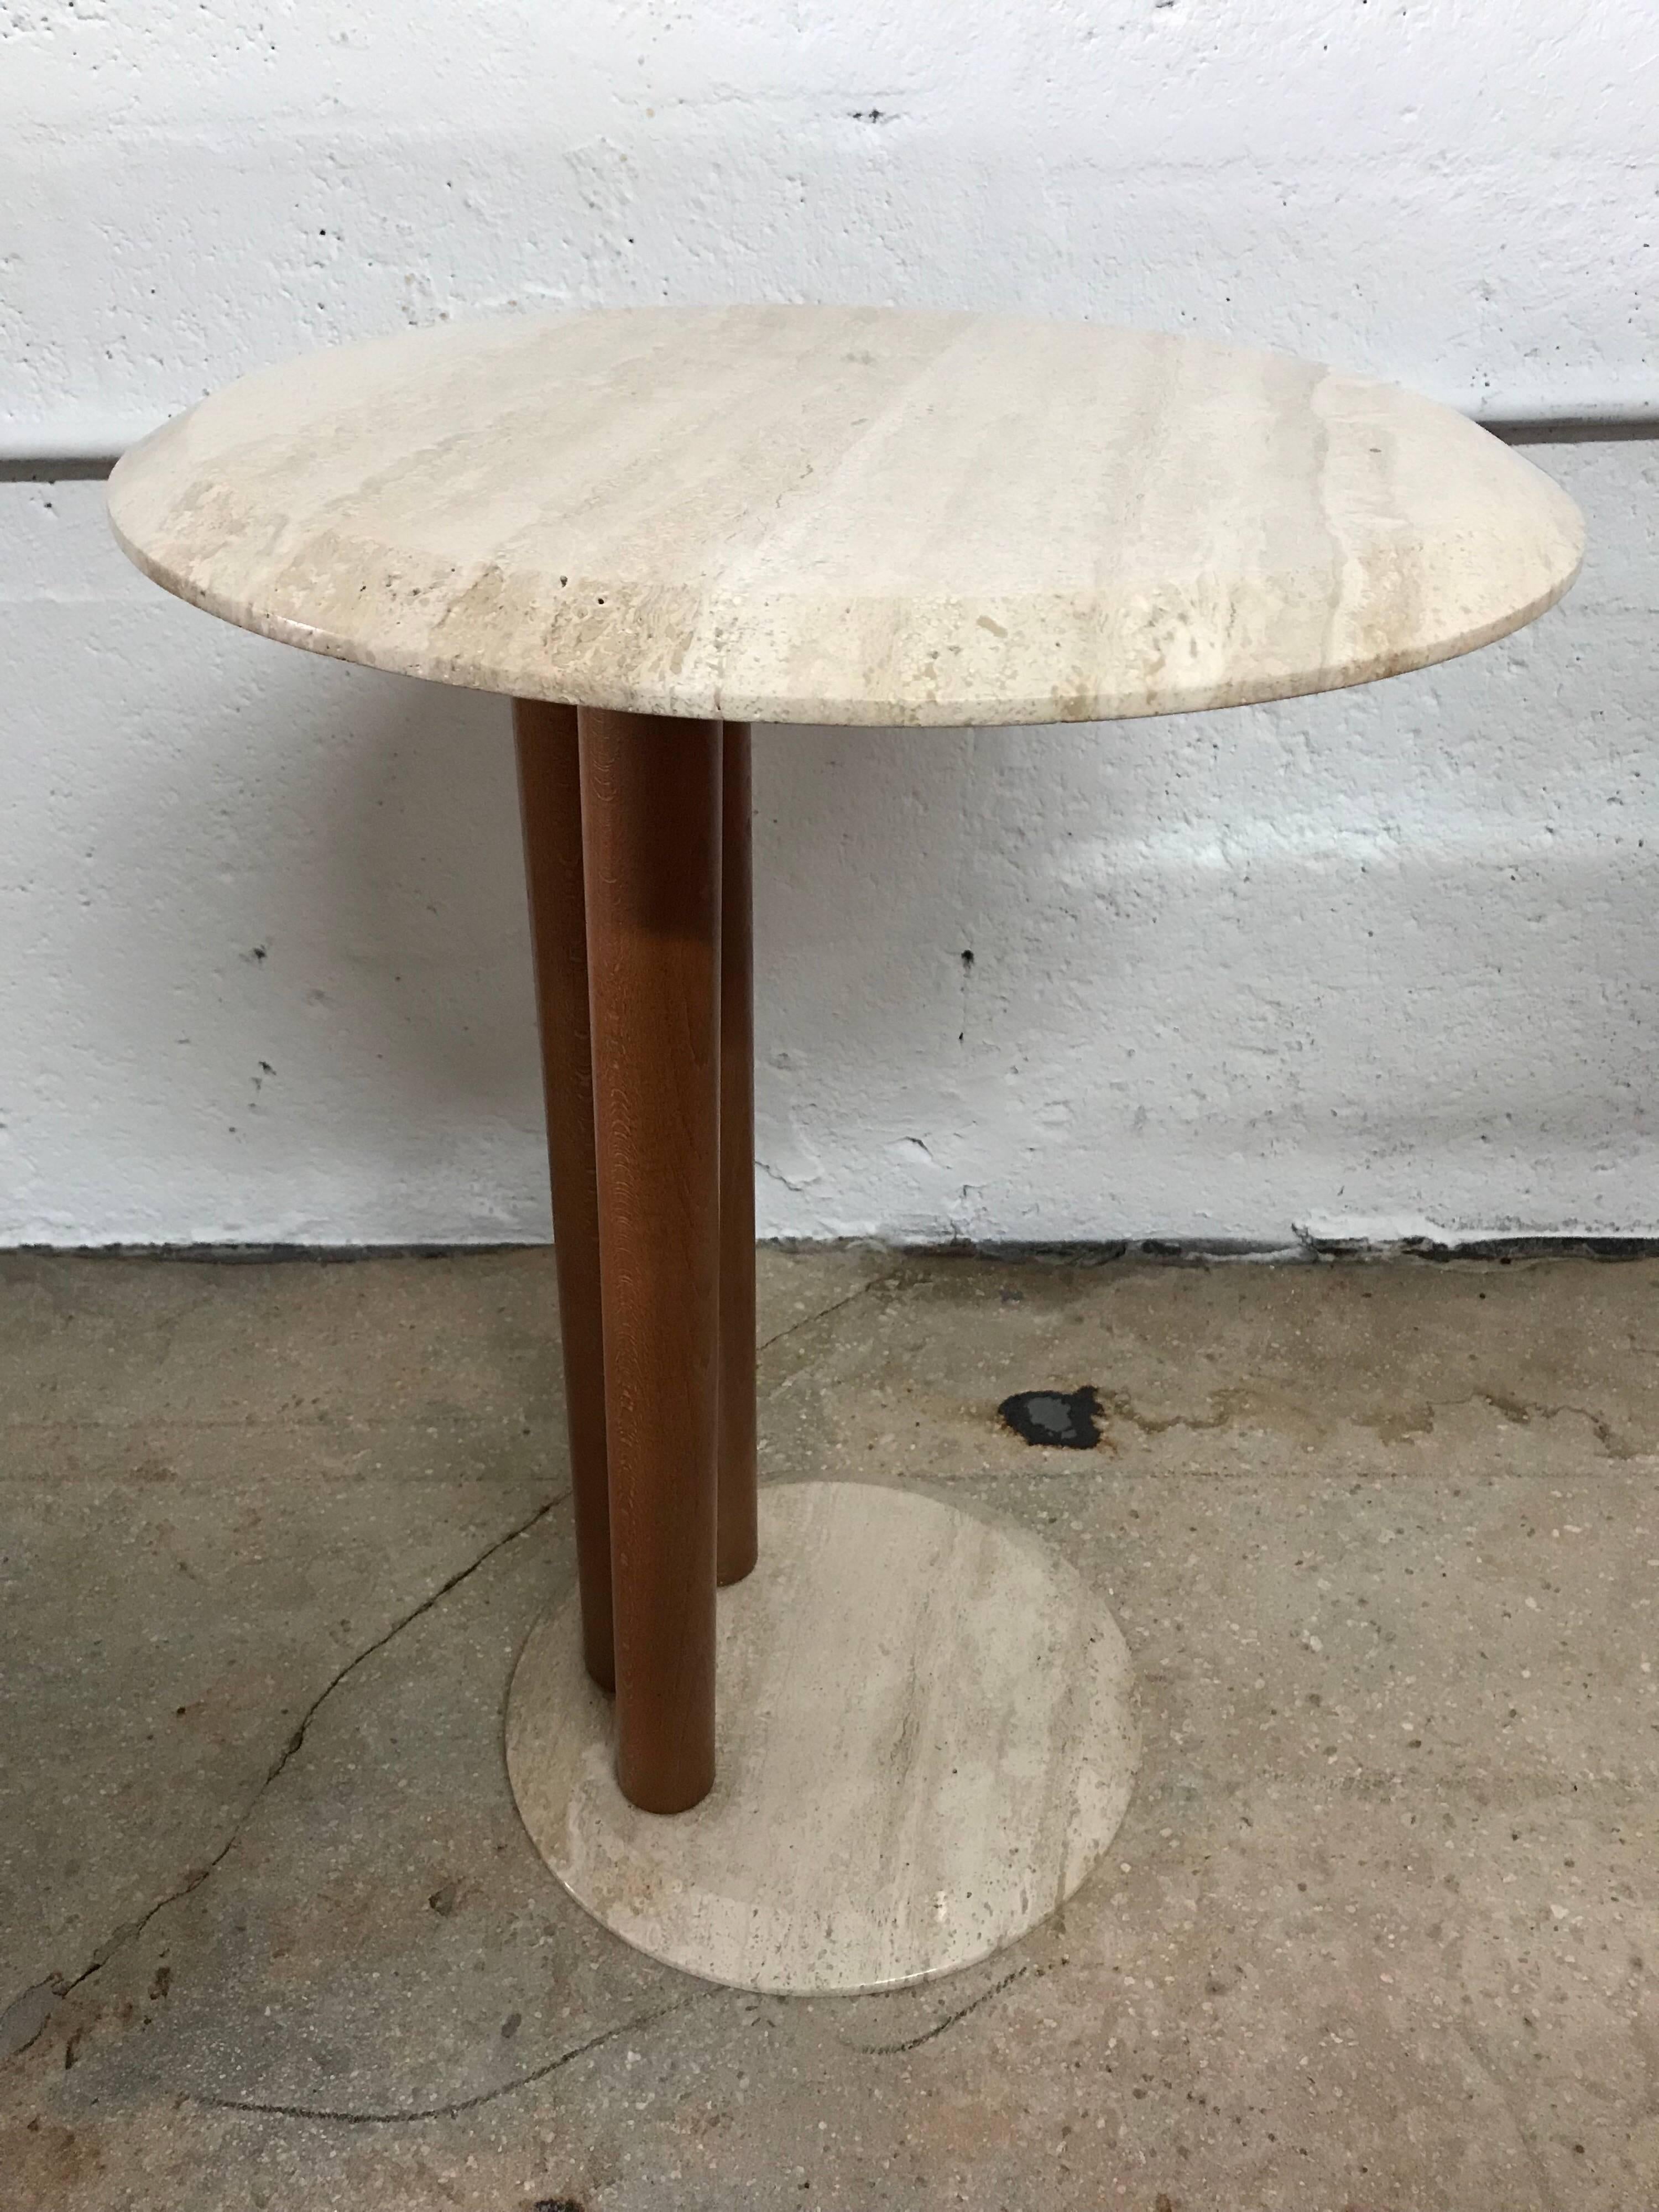 Round postmodern side or end table with an offset base and top rendered in edge beveled travertine supported by three wood cylinders, Memphis design style, Italy, 1980s